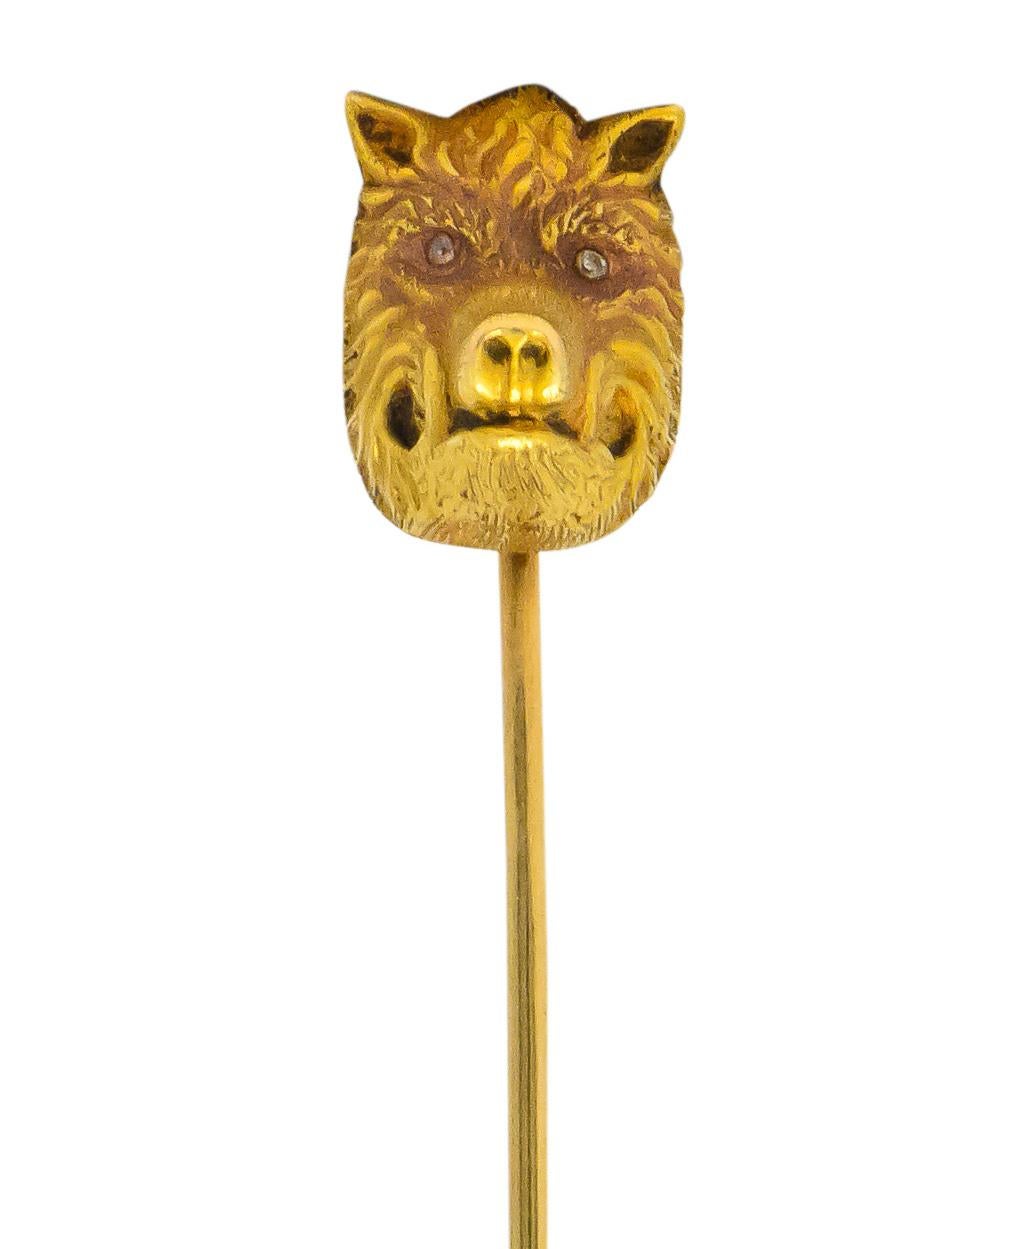 Centering a detailed boar face with a protruding tusked snout and stylized fur

Accented by single cut diamond eyes

Stamped with maker's mark for Geoffroy & Co. and 14 for 14 karat gold

Head measures: approx. 3/8 x 1/2 inch

Total length: 2 1/2